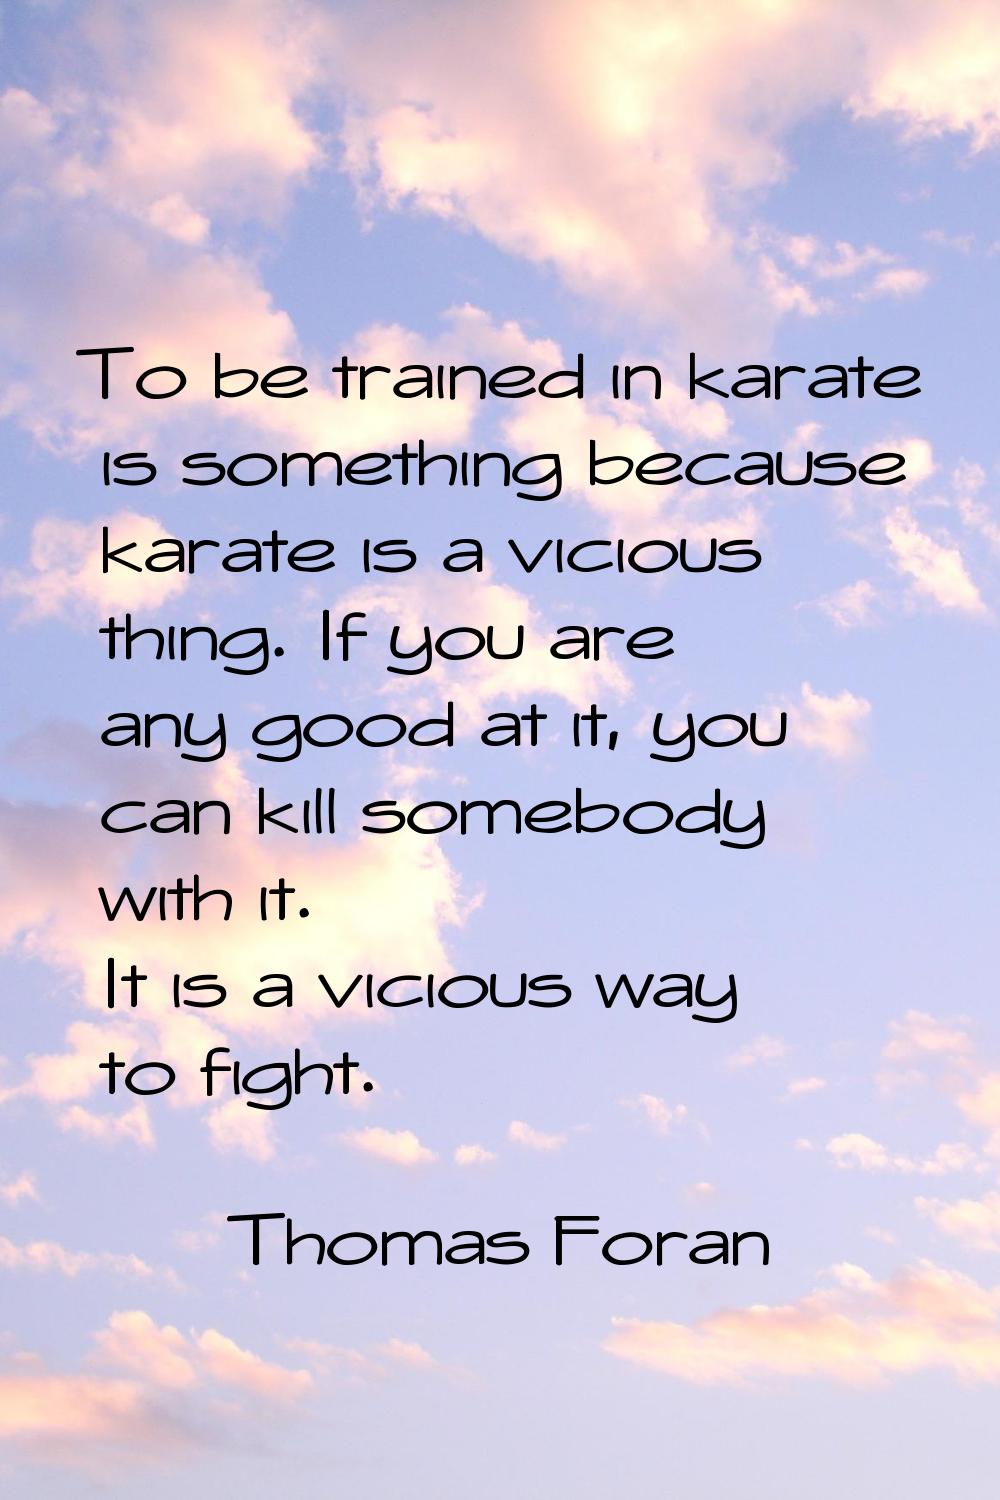 To be trained in karate is something because karate is a vicious thing. If you are any good at it, 